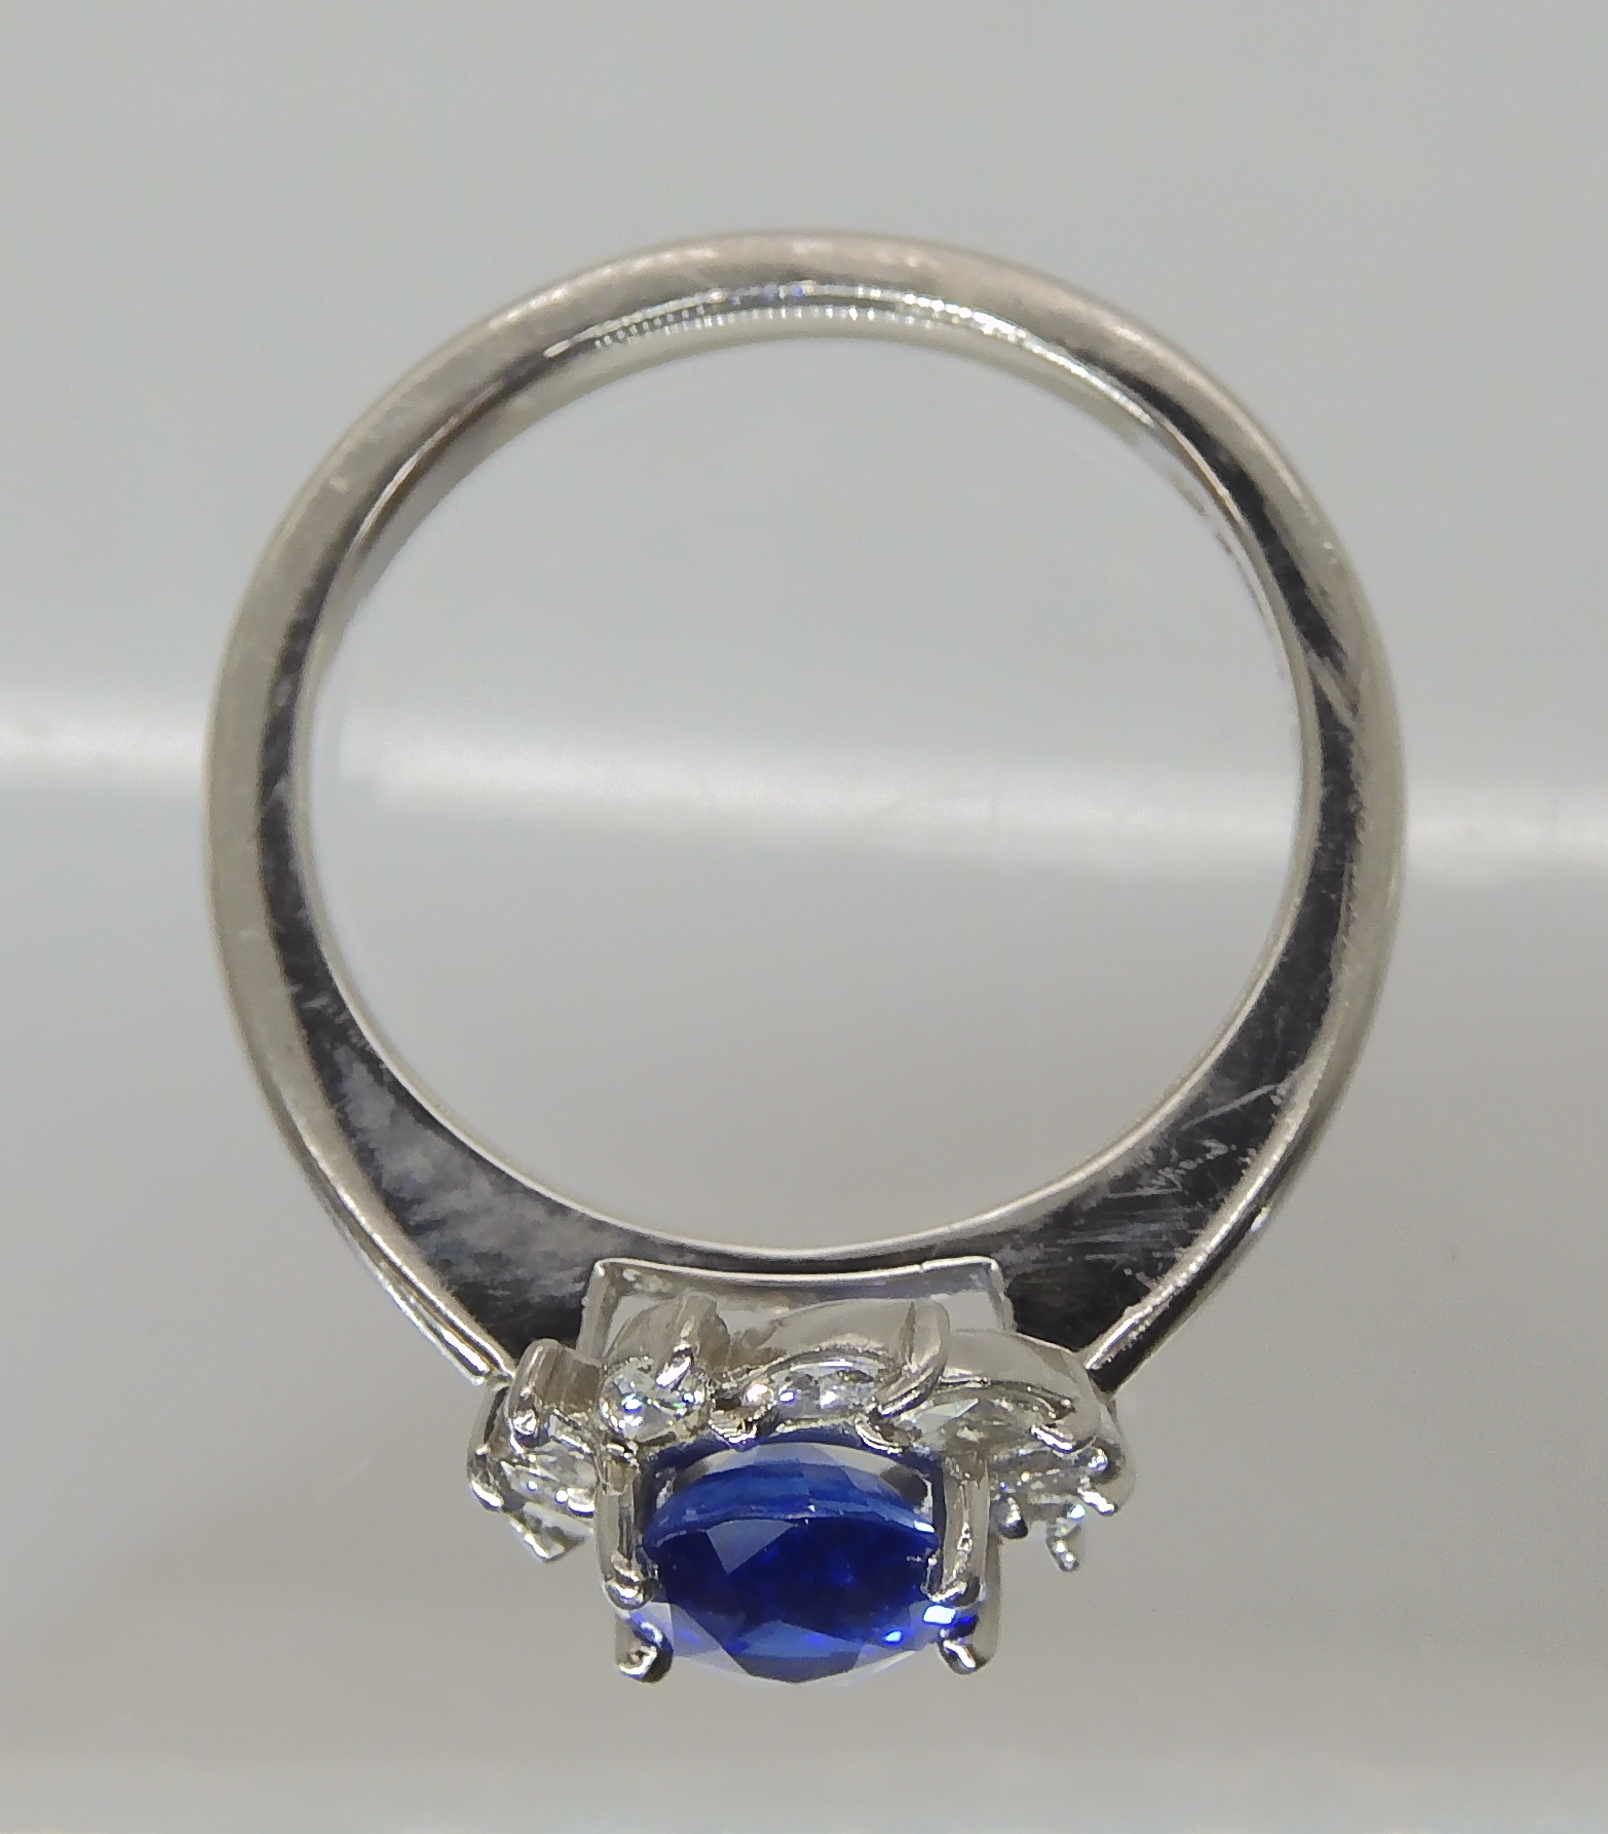 A PLATINUM SAPPHIRE AND DIAMOND RING made by Blair & Sheridan, the 8.2 x 5.9 x 3.5mm sapphire is - Image 4 of 5